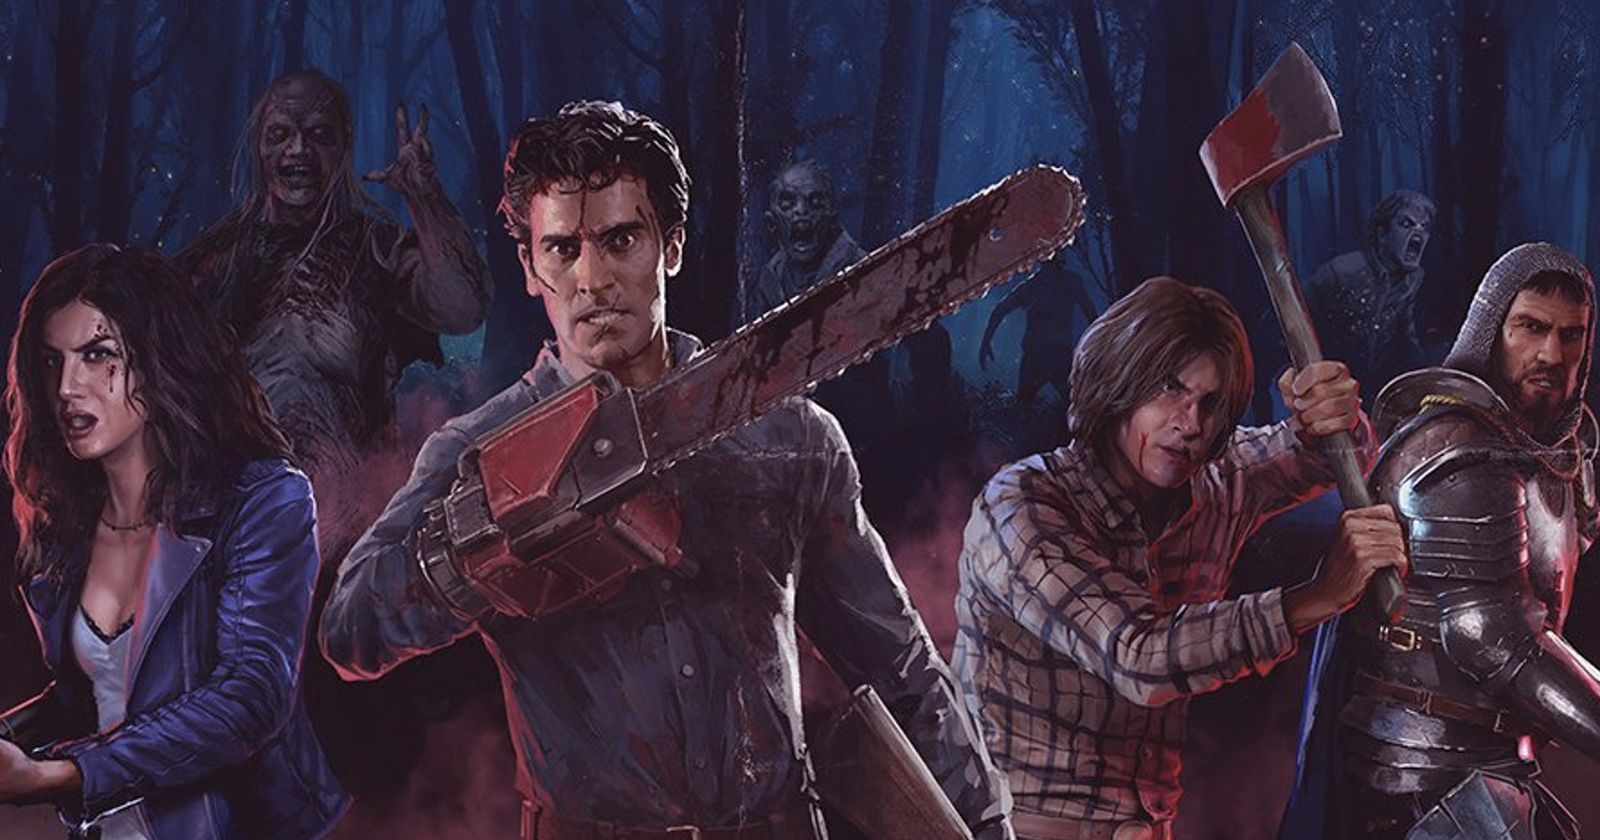 Evil Dead Single Player - Can You Play Solo?